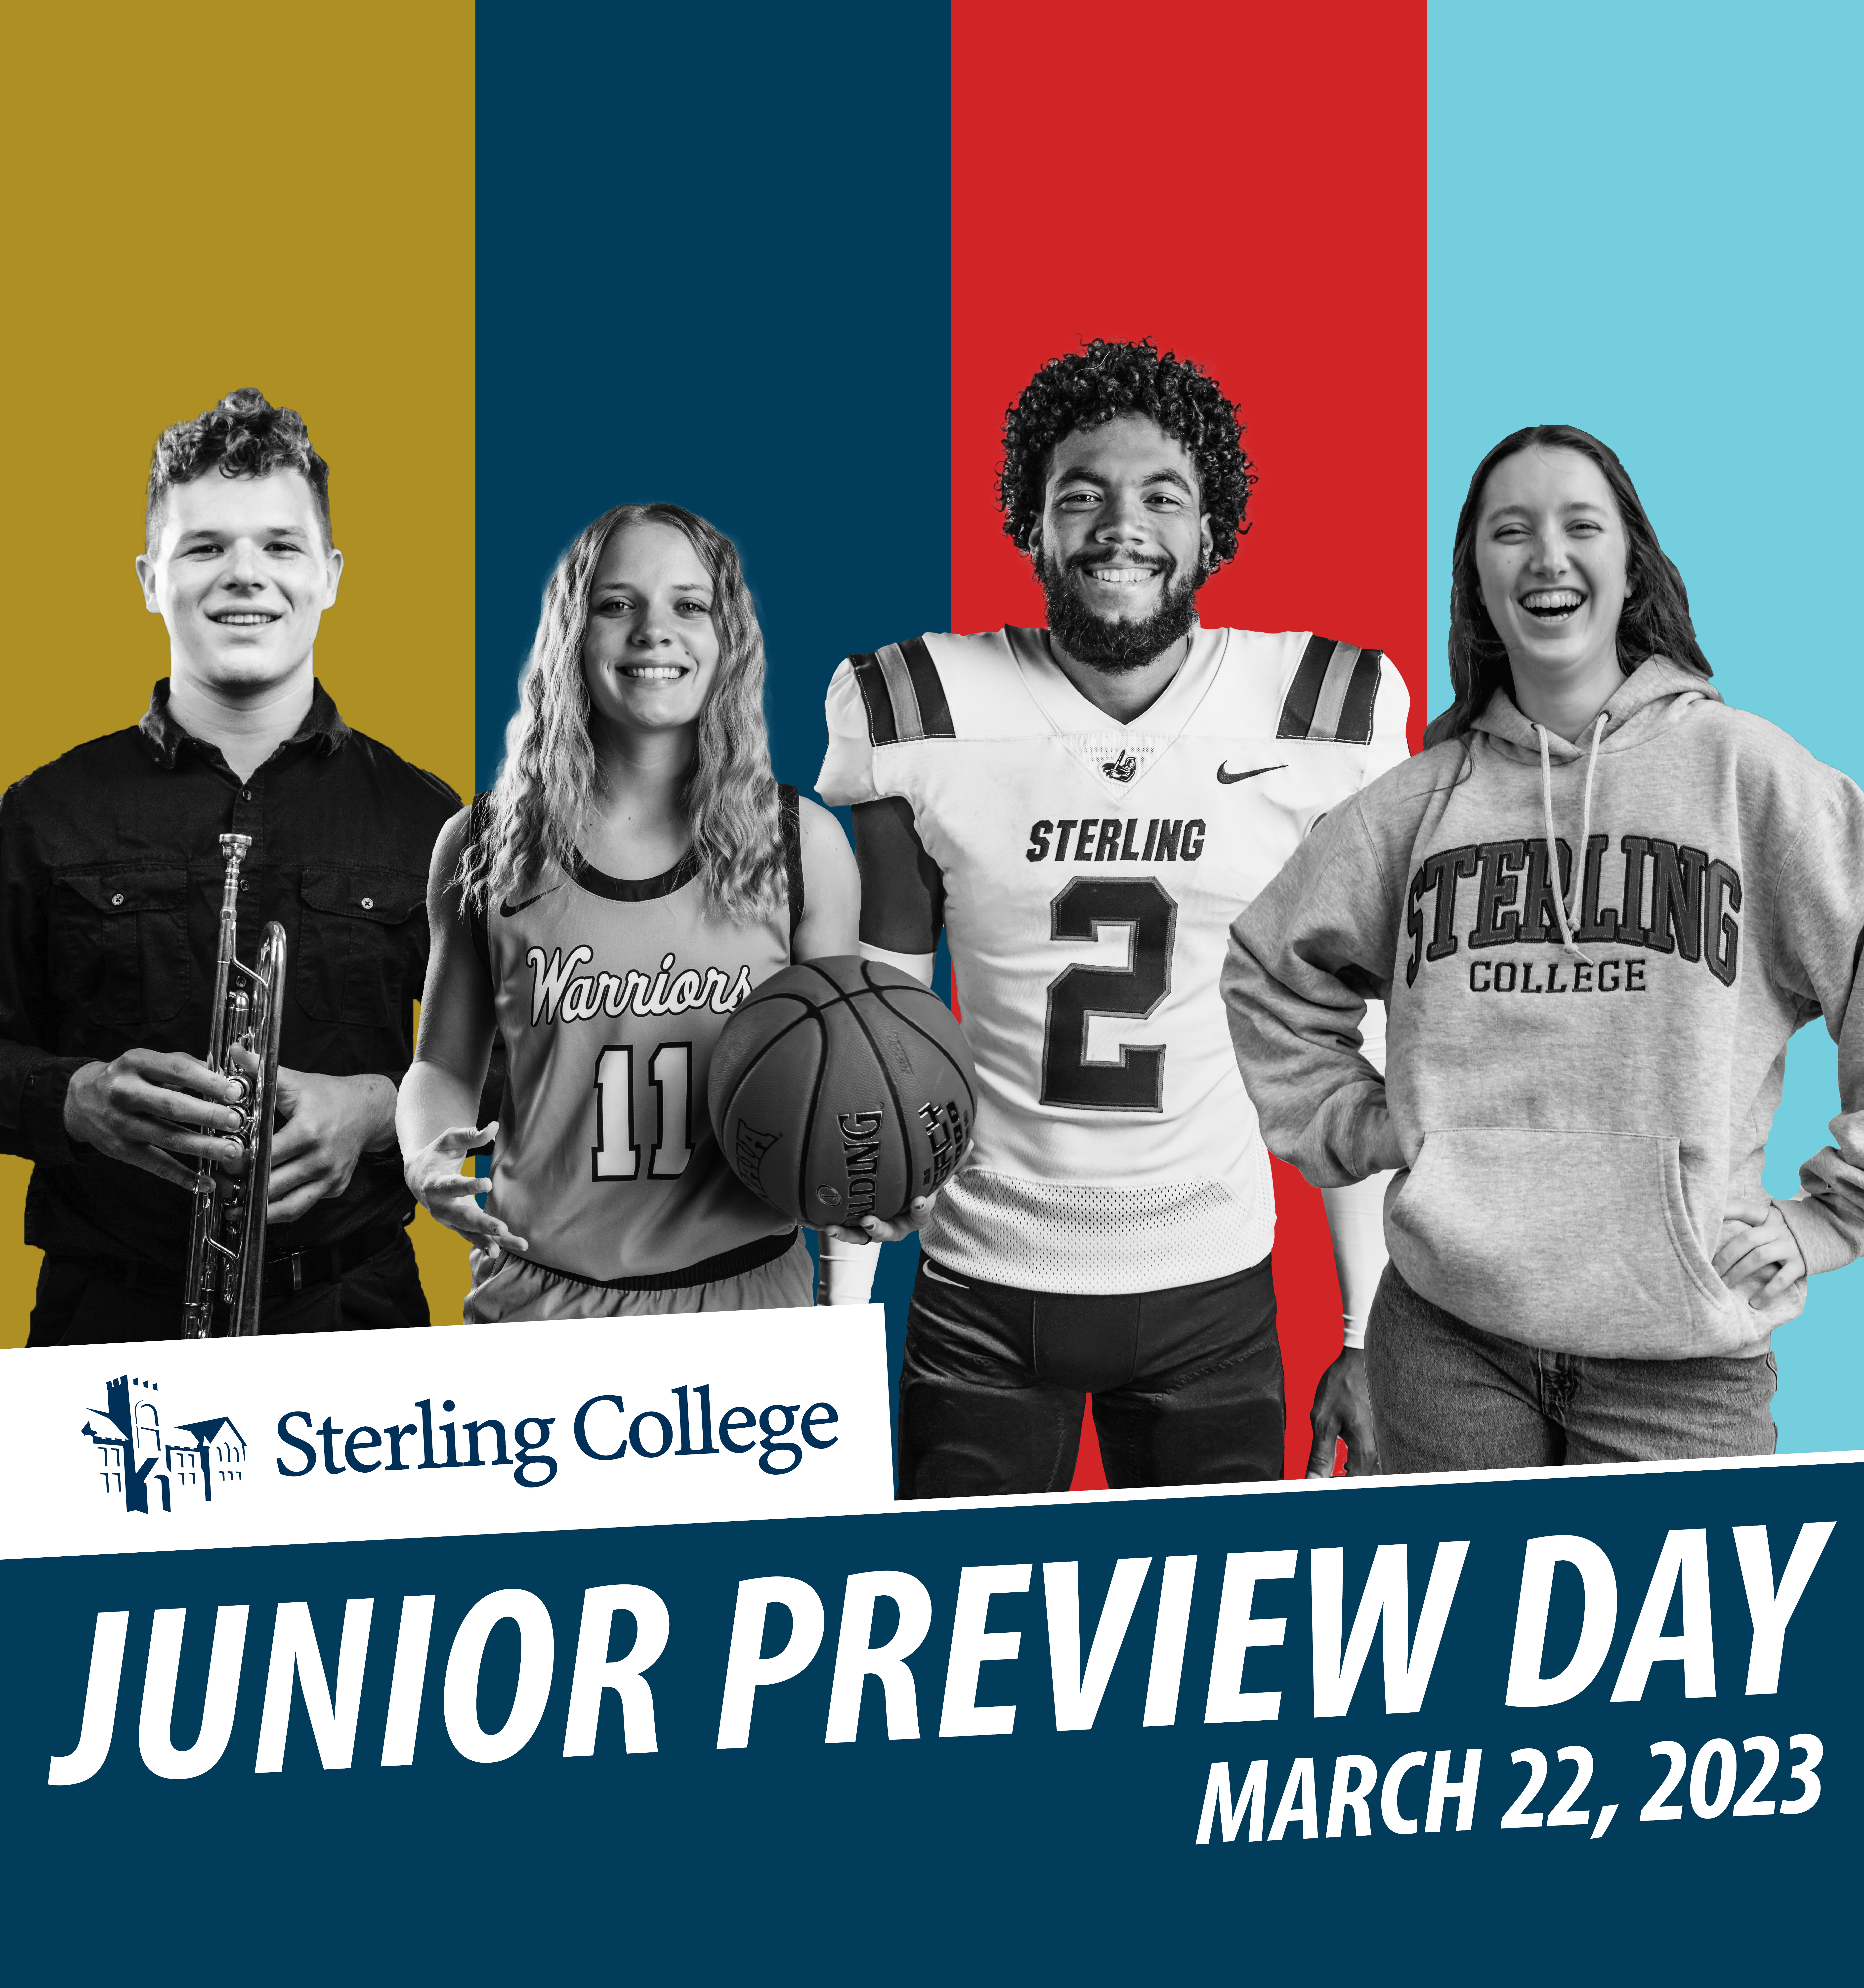 Junior Preview Day - Sterling College